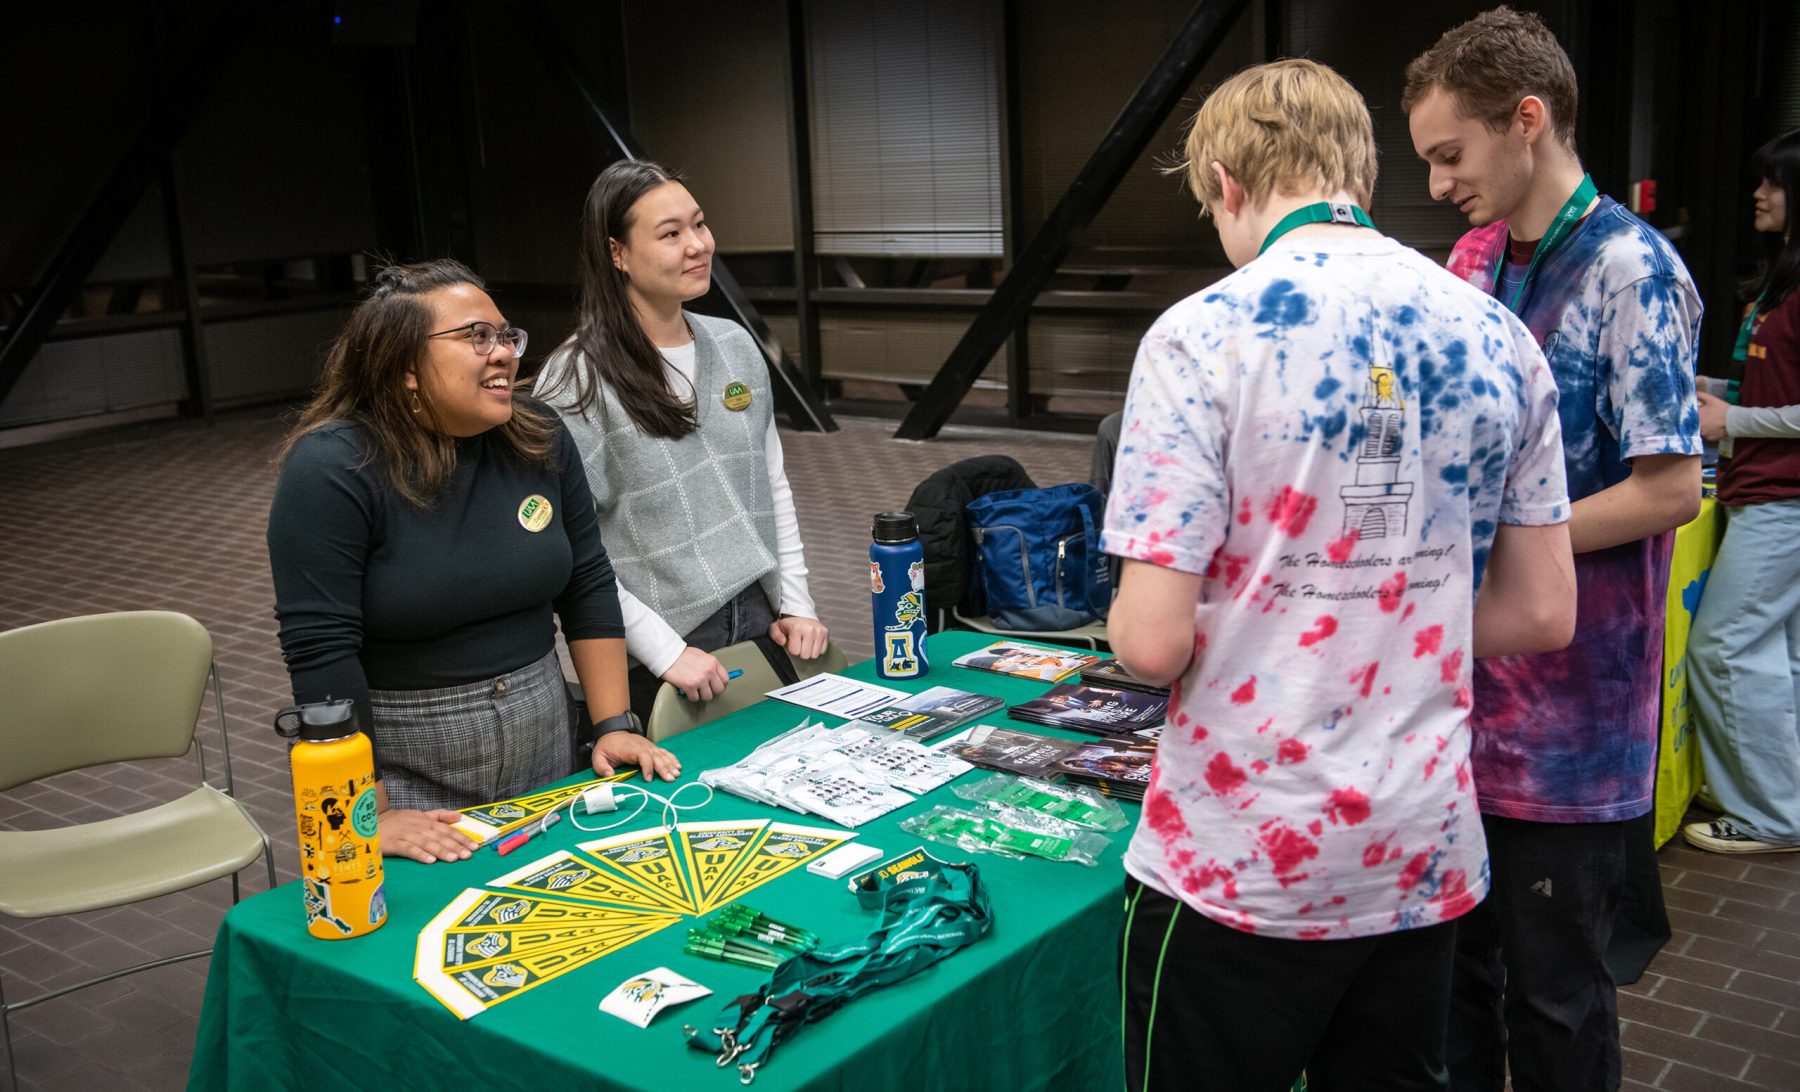 UAA admissions counselors Daphne Ang and Elise Wood talk with teams of students from around the state during the opening event in the student union as UAA hosts the Alaska Academic Decathlon 2023 State Competition.